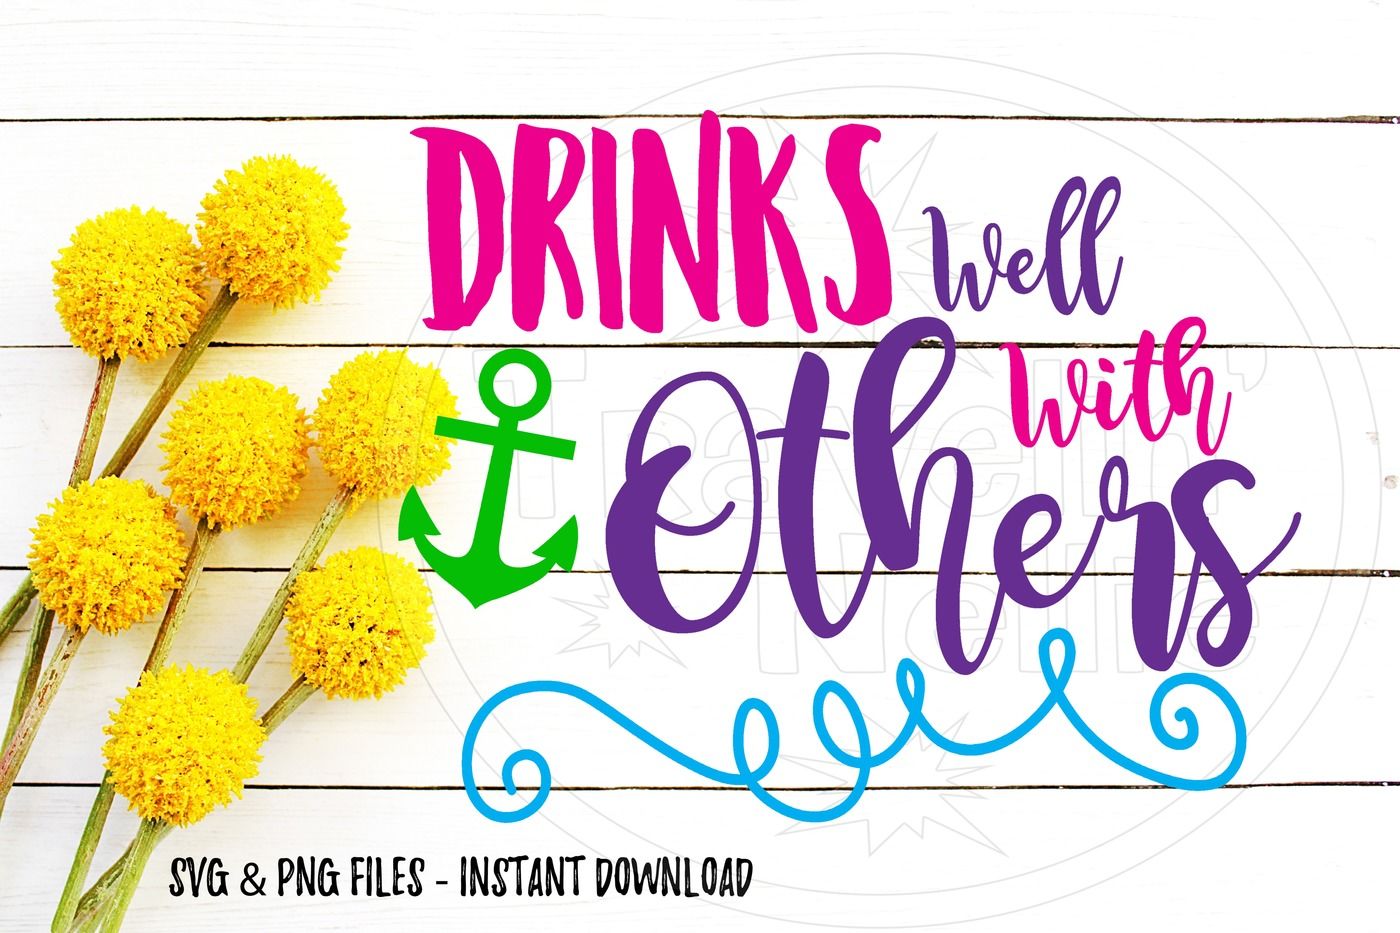 Drinks Well With Others Funny Cruise Svg Print Cut Image Files Cameo By Travelin Nellie Thehungryjpeg Com